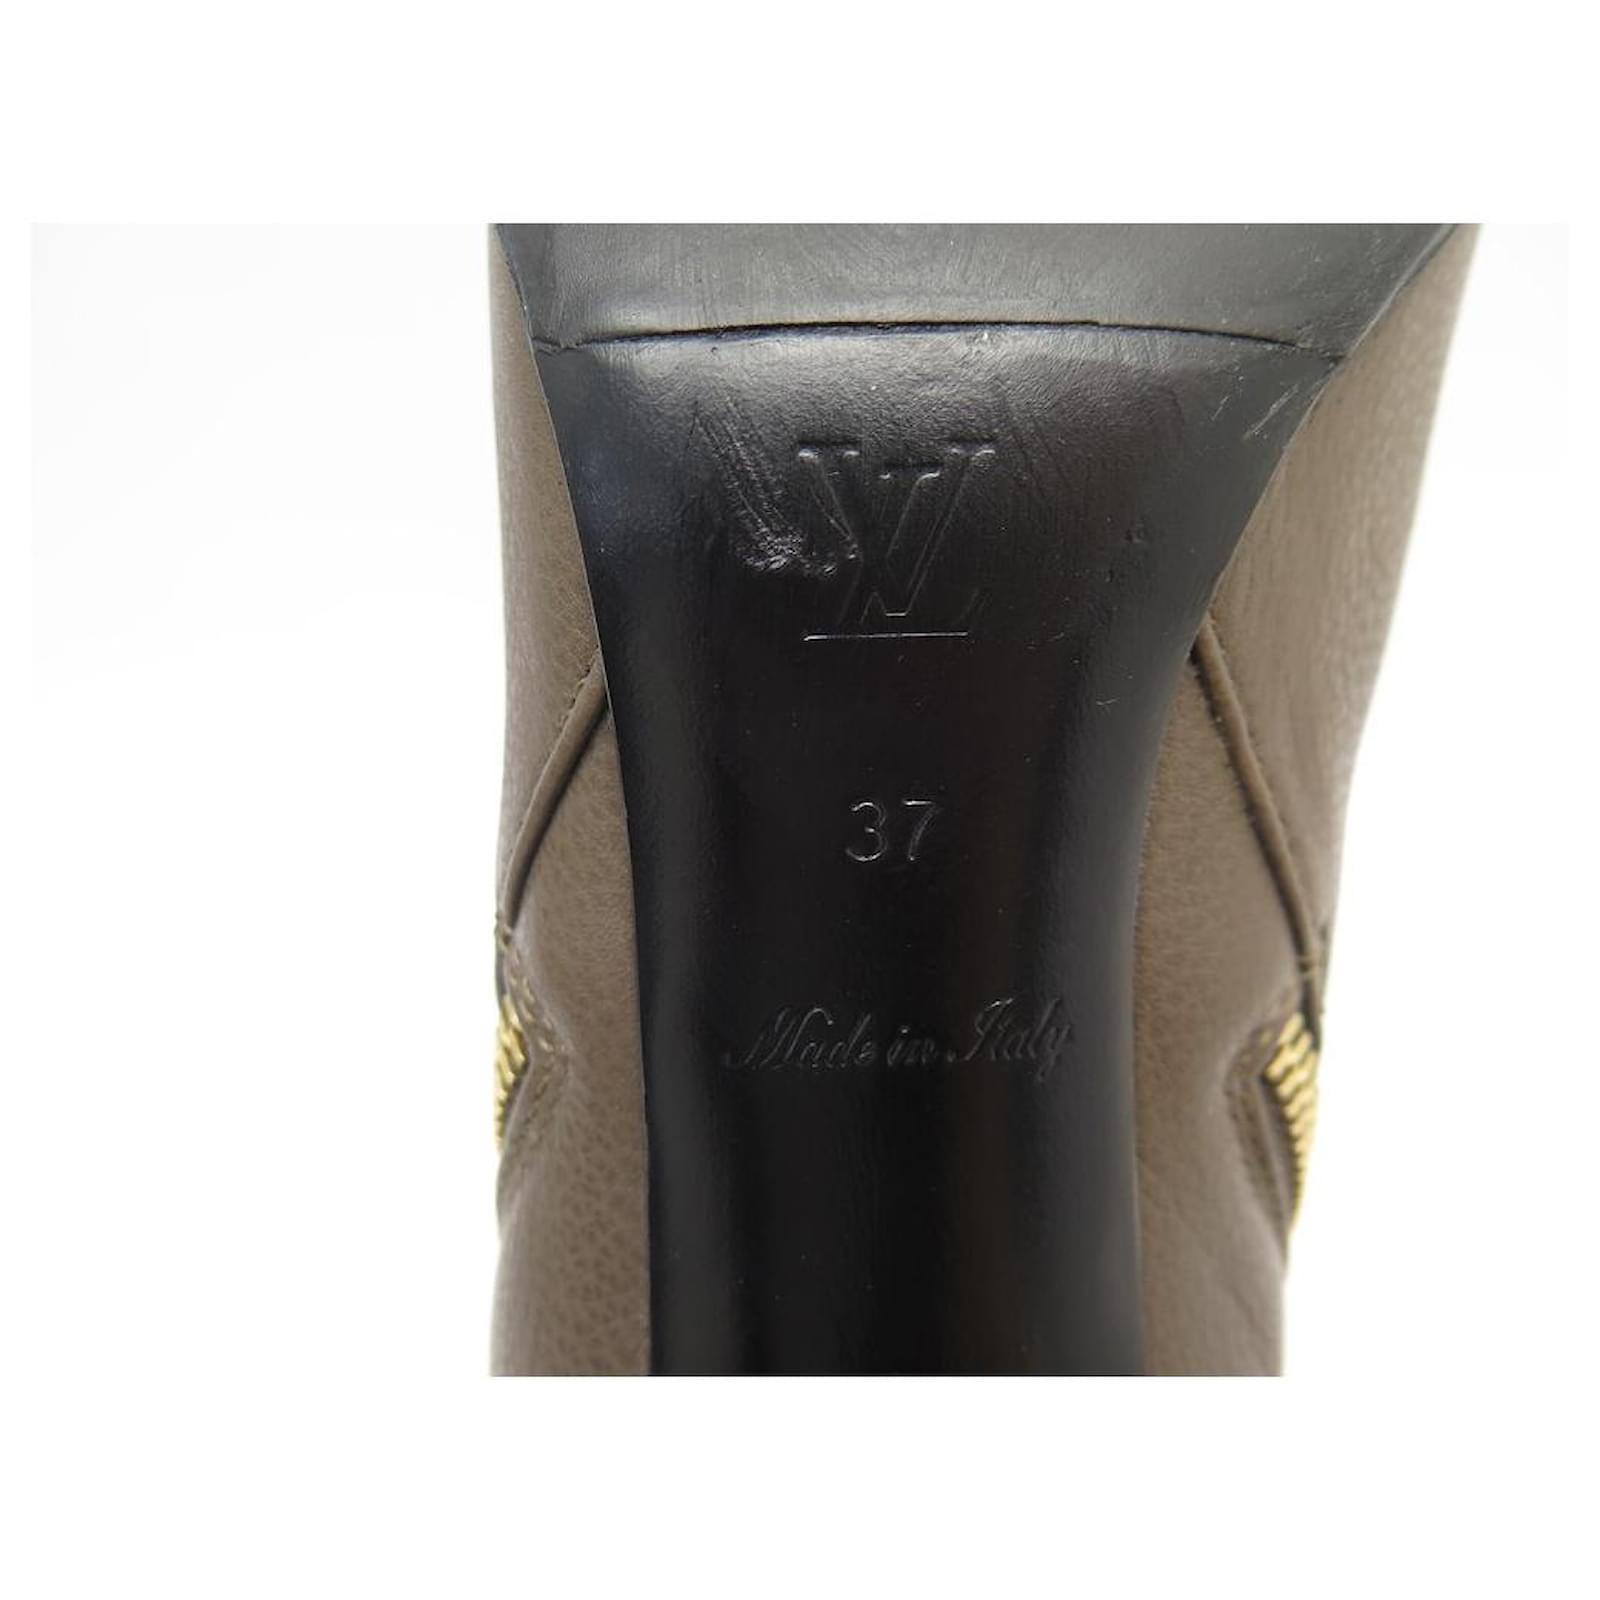 LOUIS VUITTON INSPIRED INFINITY ANKLE BOOTS 37 LEATHER MONOGRAM